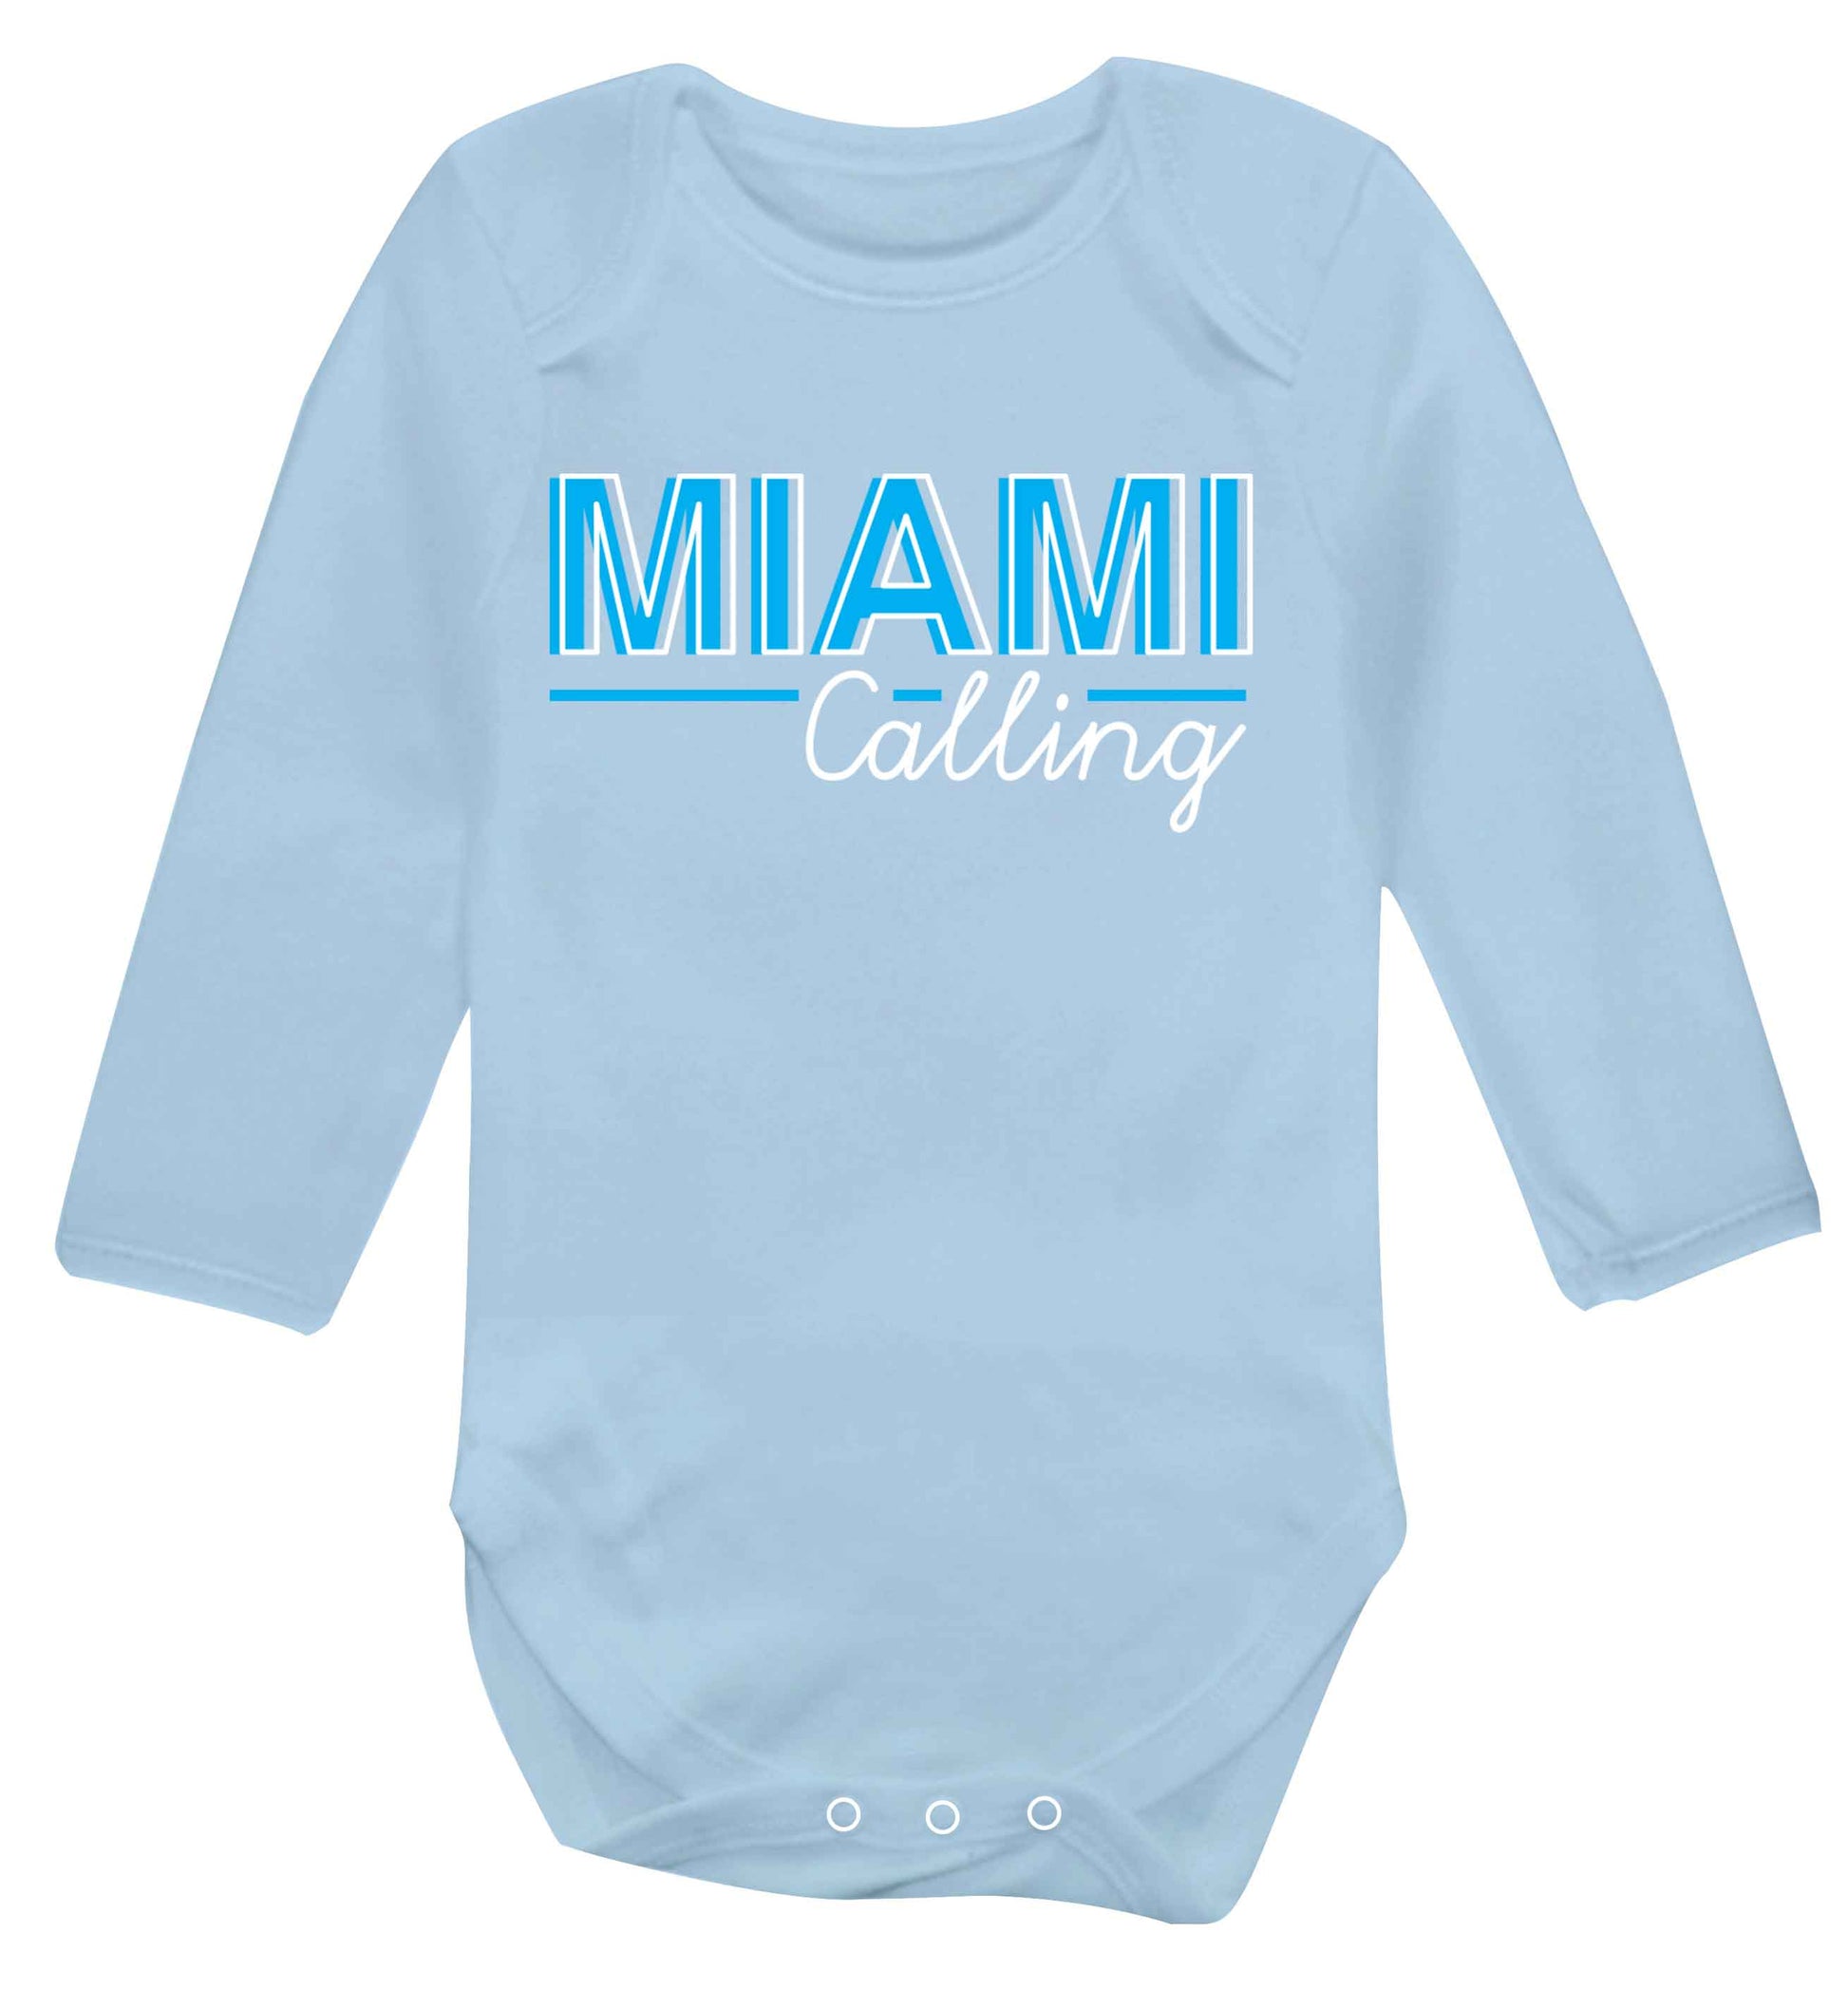 Miami calling Baby Vest long sleeved pale blue 6-12 months